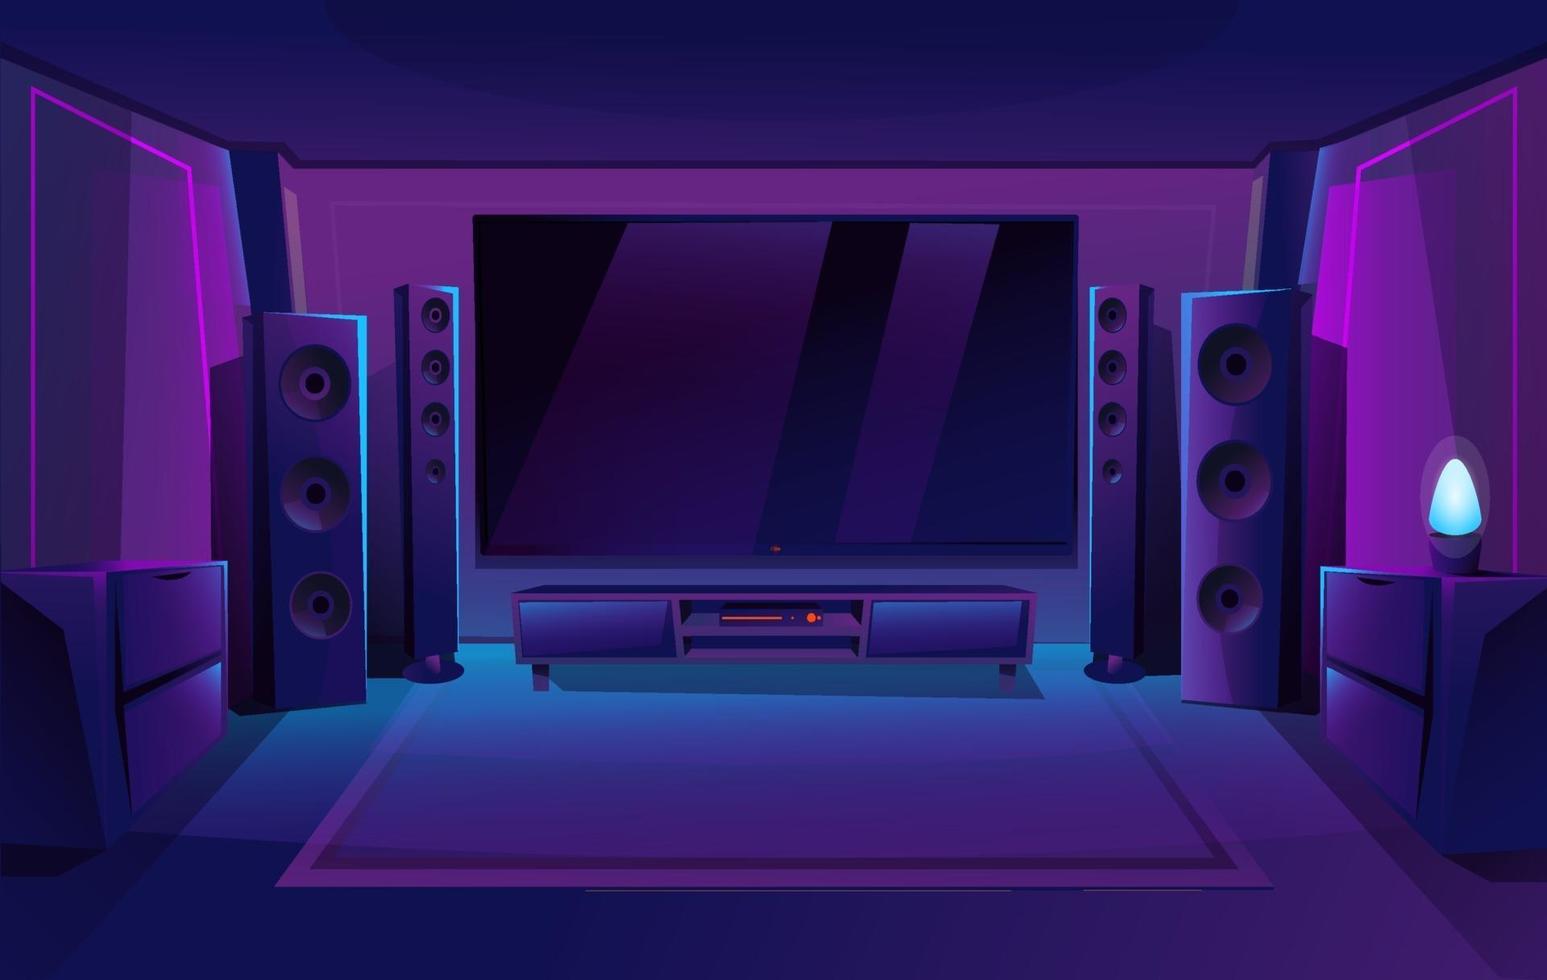 Home theater with big music speakers. Game room interior. Night apartment. Big TV screen. Vector illustration.